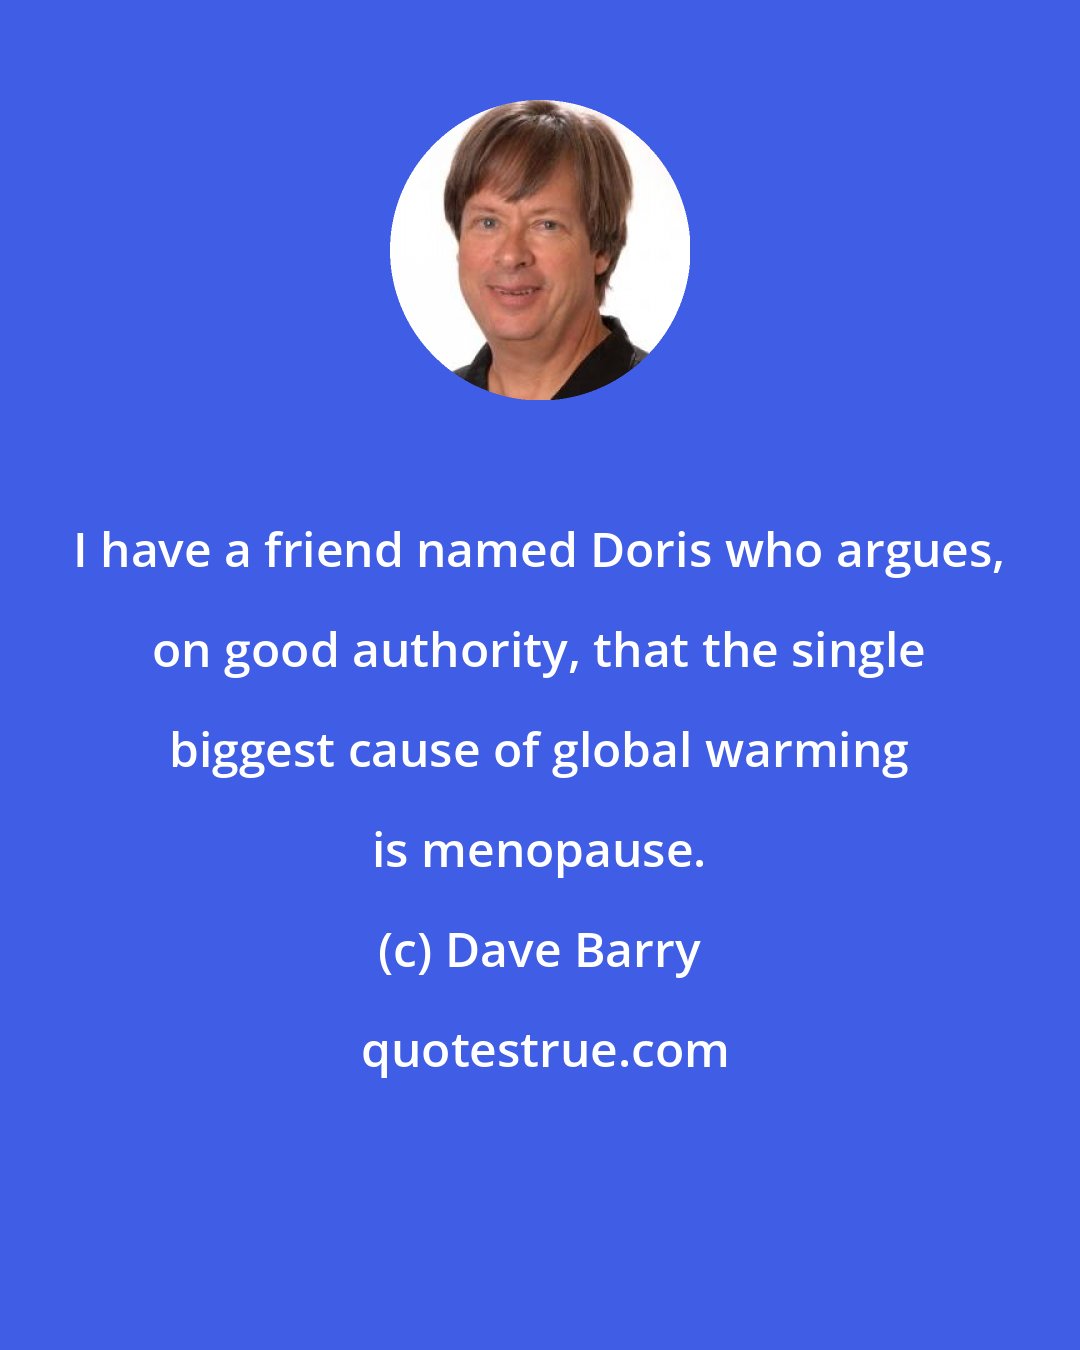 Dave Barry: I have a friend named Doris who argues, on good authority, that the single biggest cause of global warming is menopause.